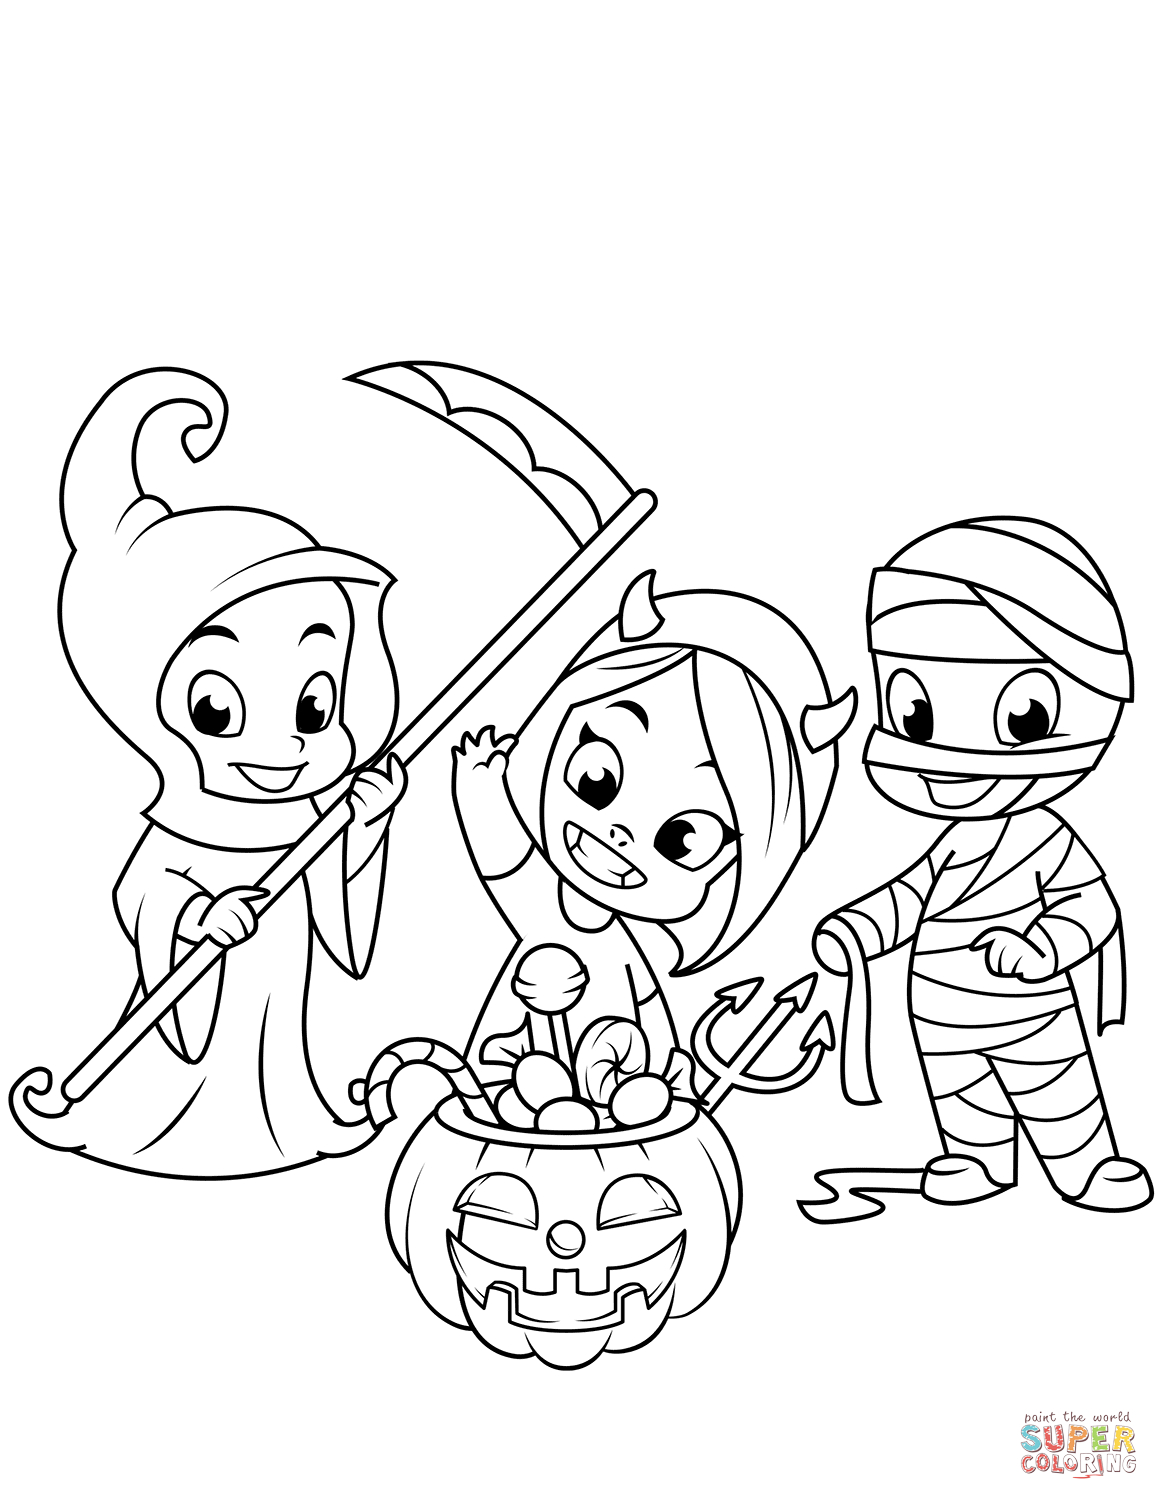 Happy Jack O Lantern Coloring Pages Cute Little Grim Reaper Devil Mummy And A Jack Olantern With